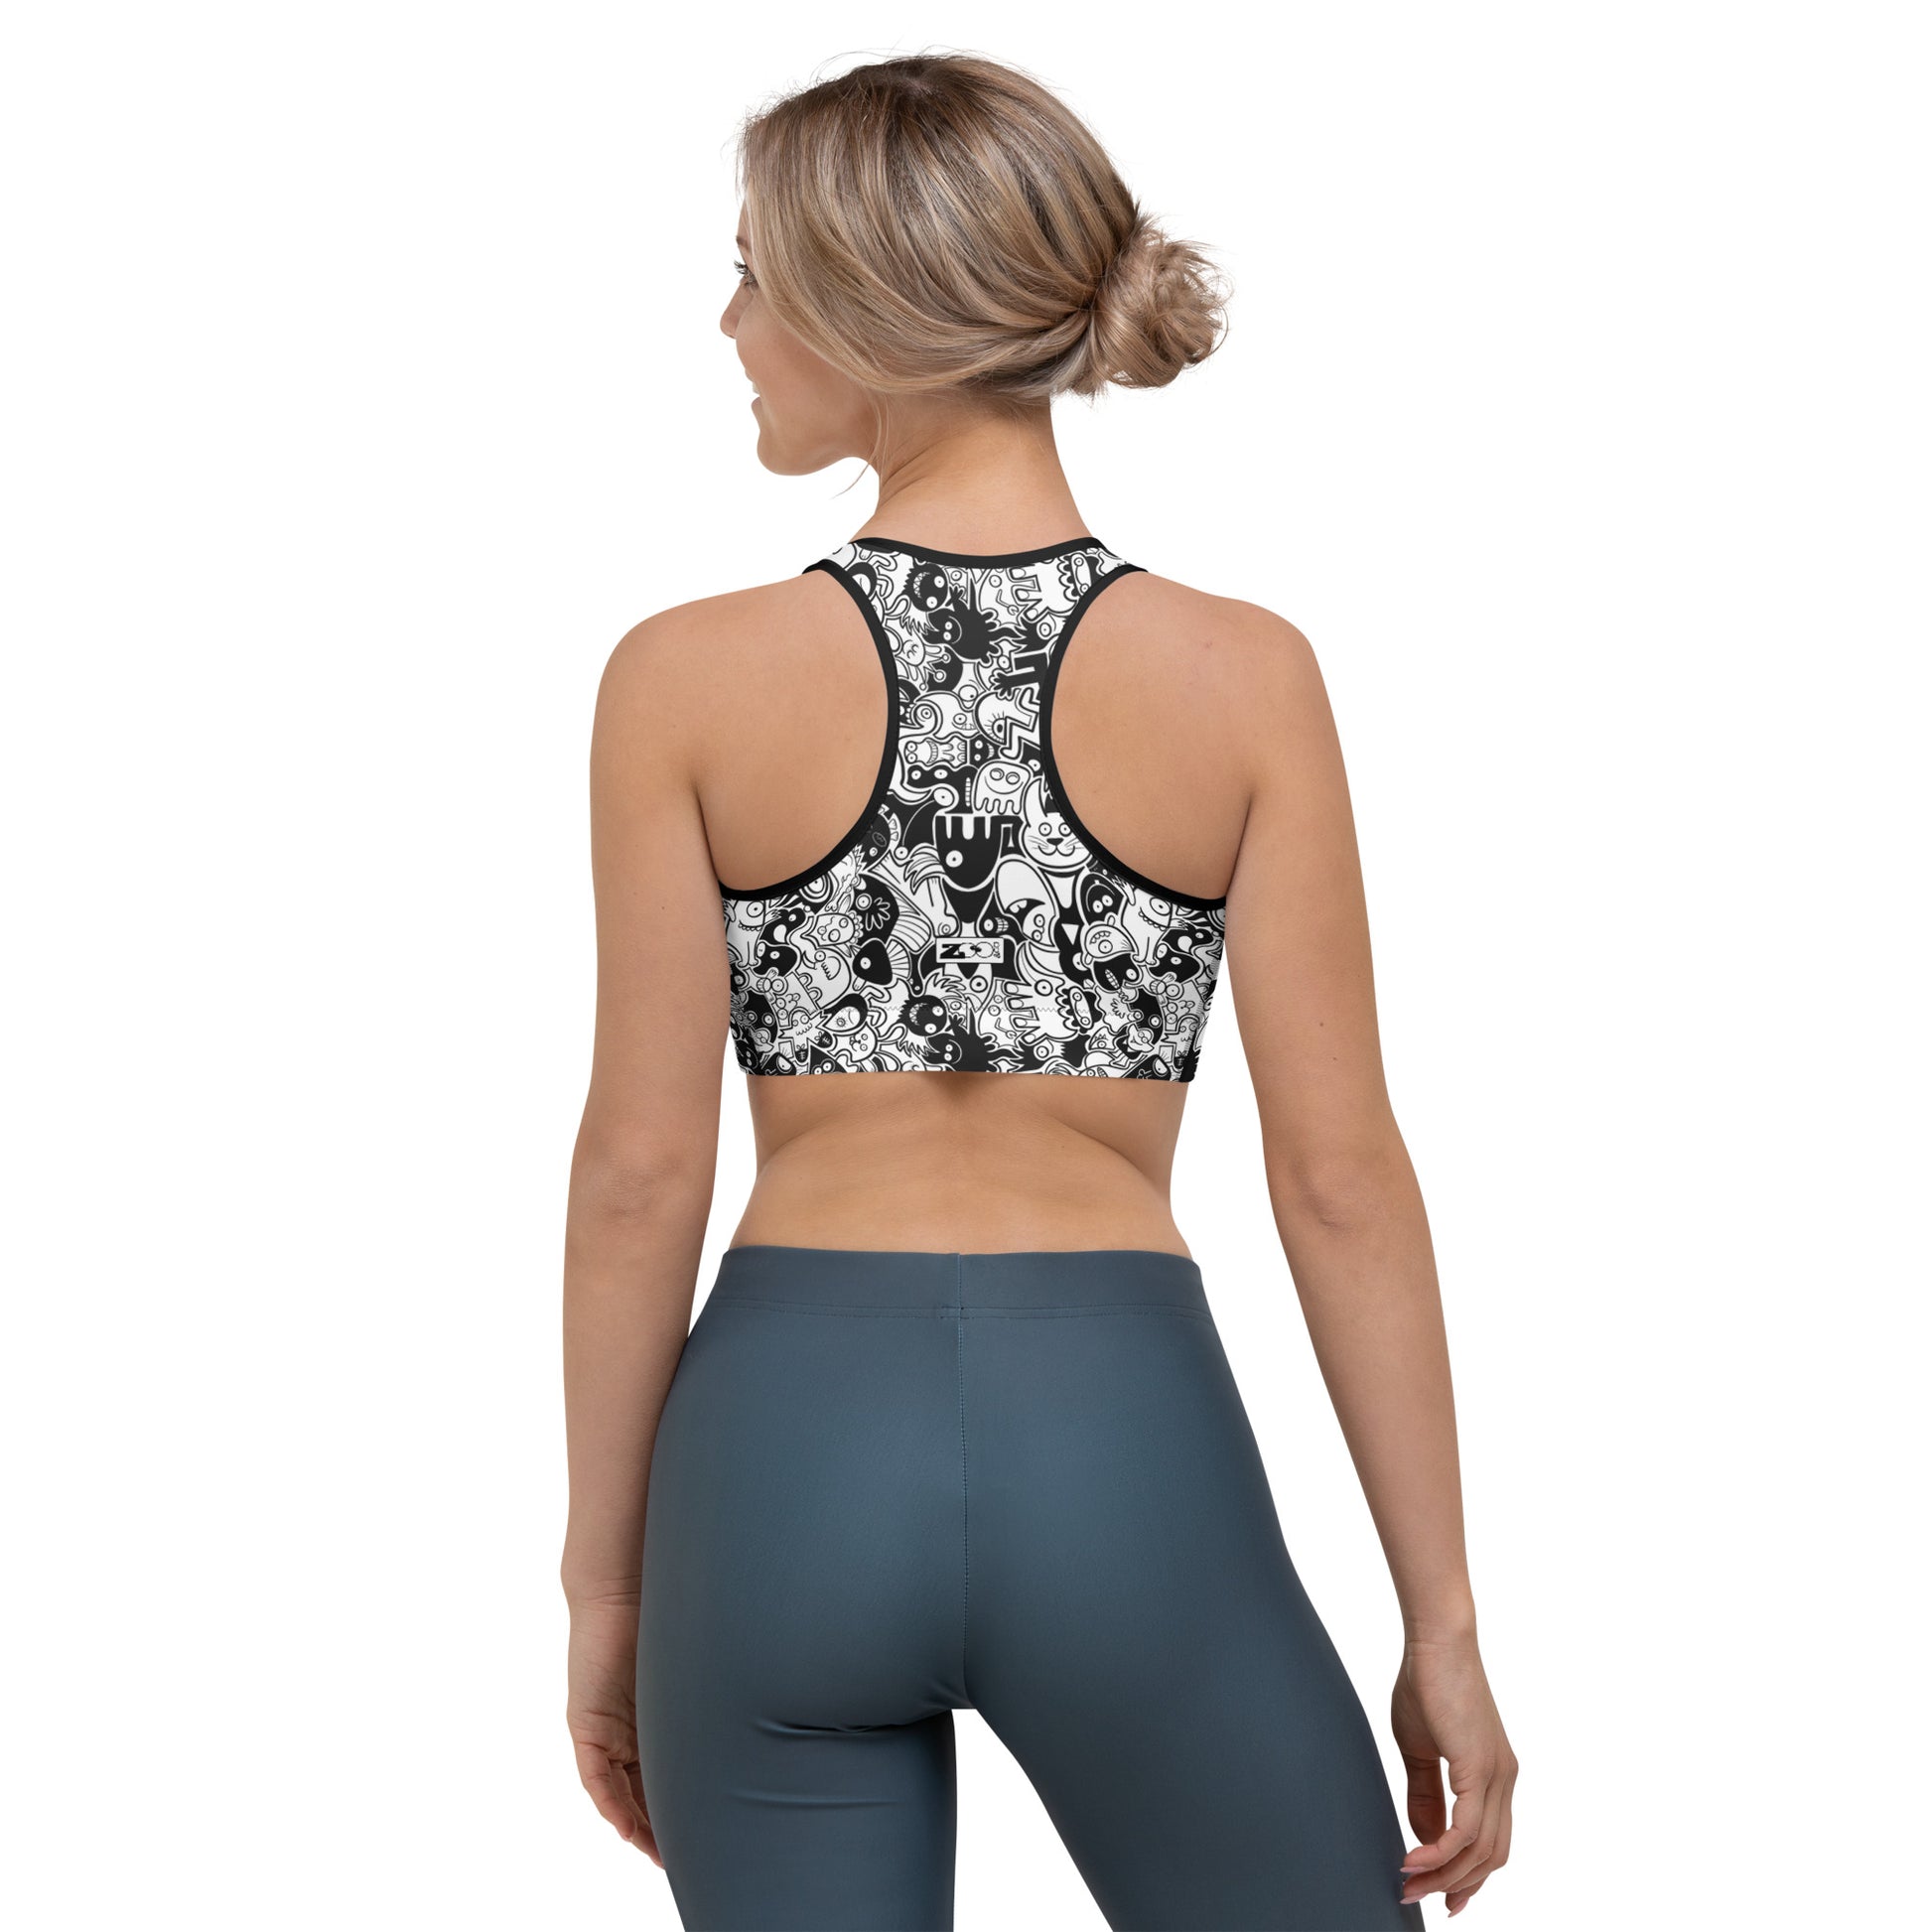 Joyful crowd of black and white doodle creatures Sports bra. Back view